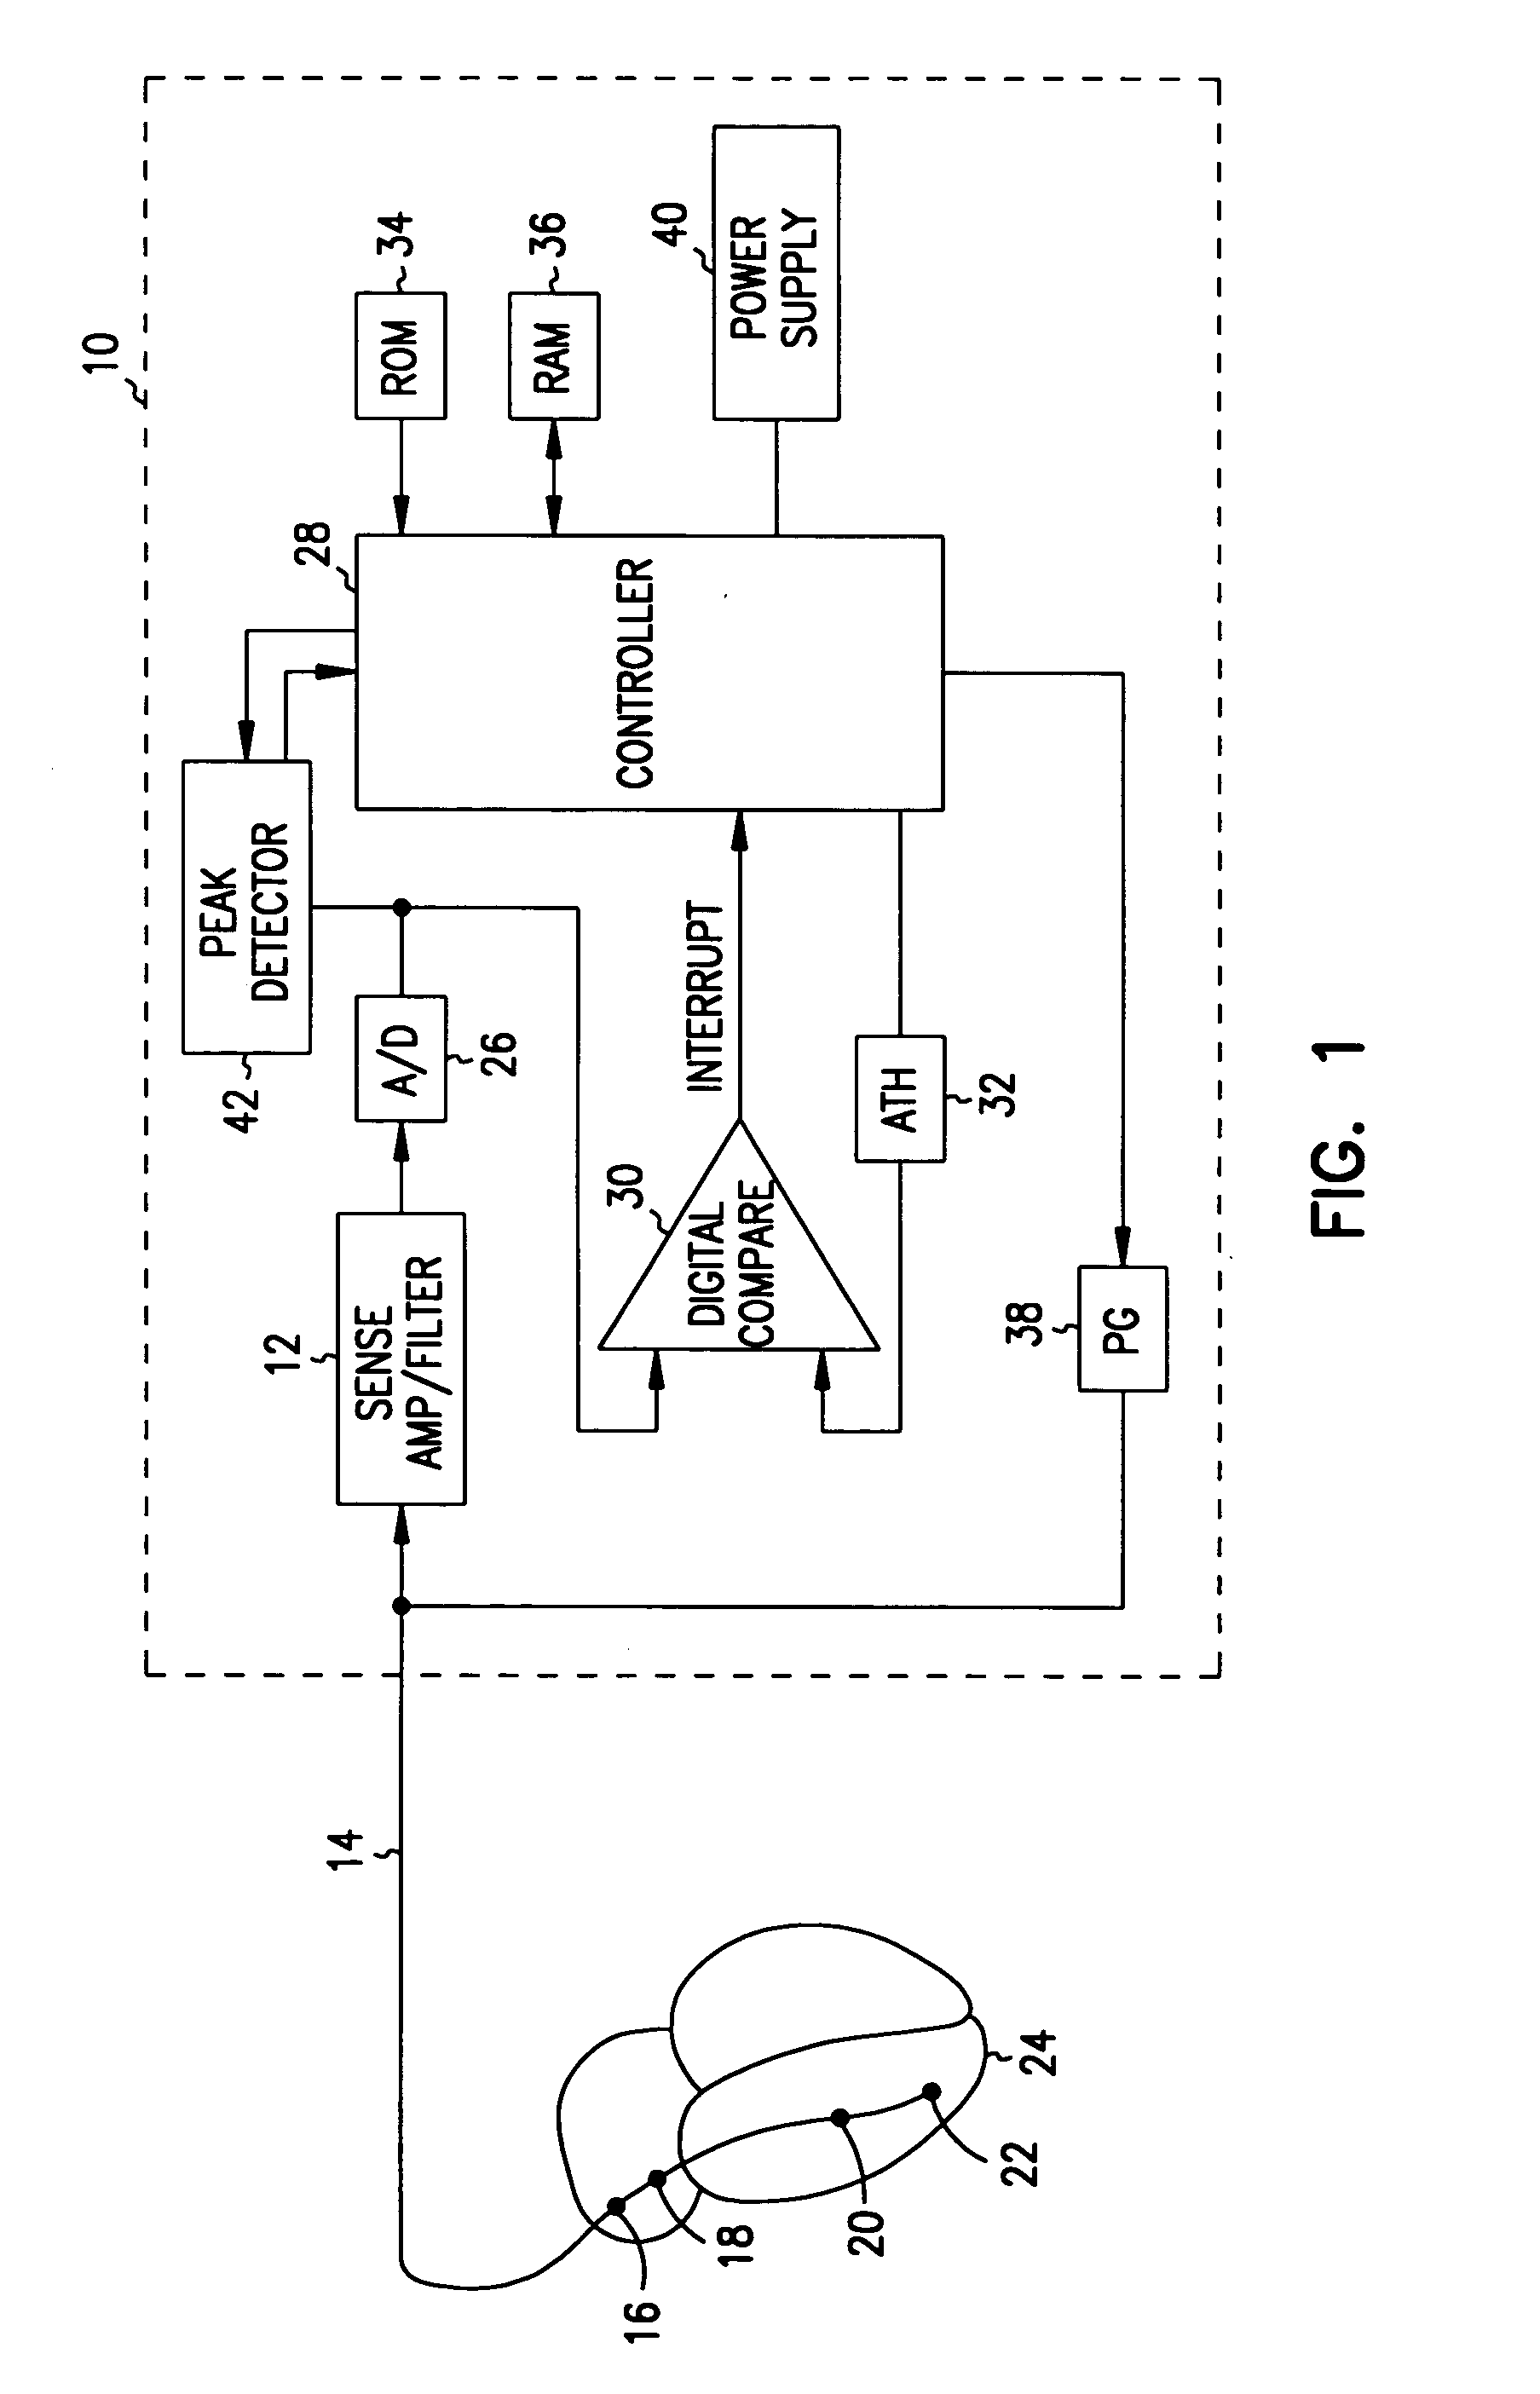 Method and apparatus for adjusting the sensing threshold of a cardiac rhythm management device